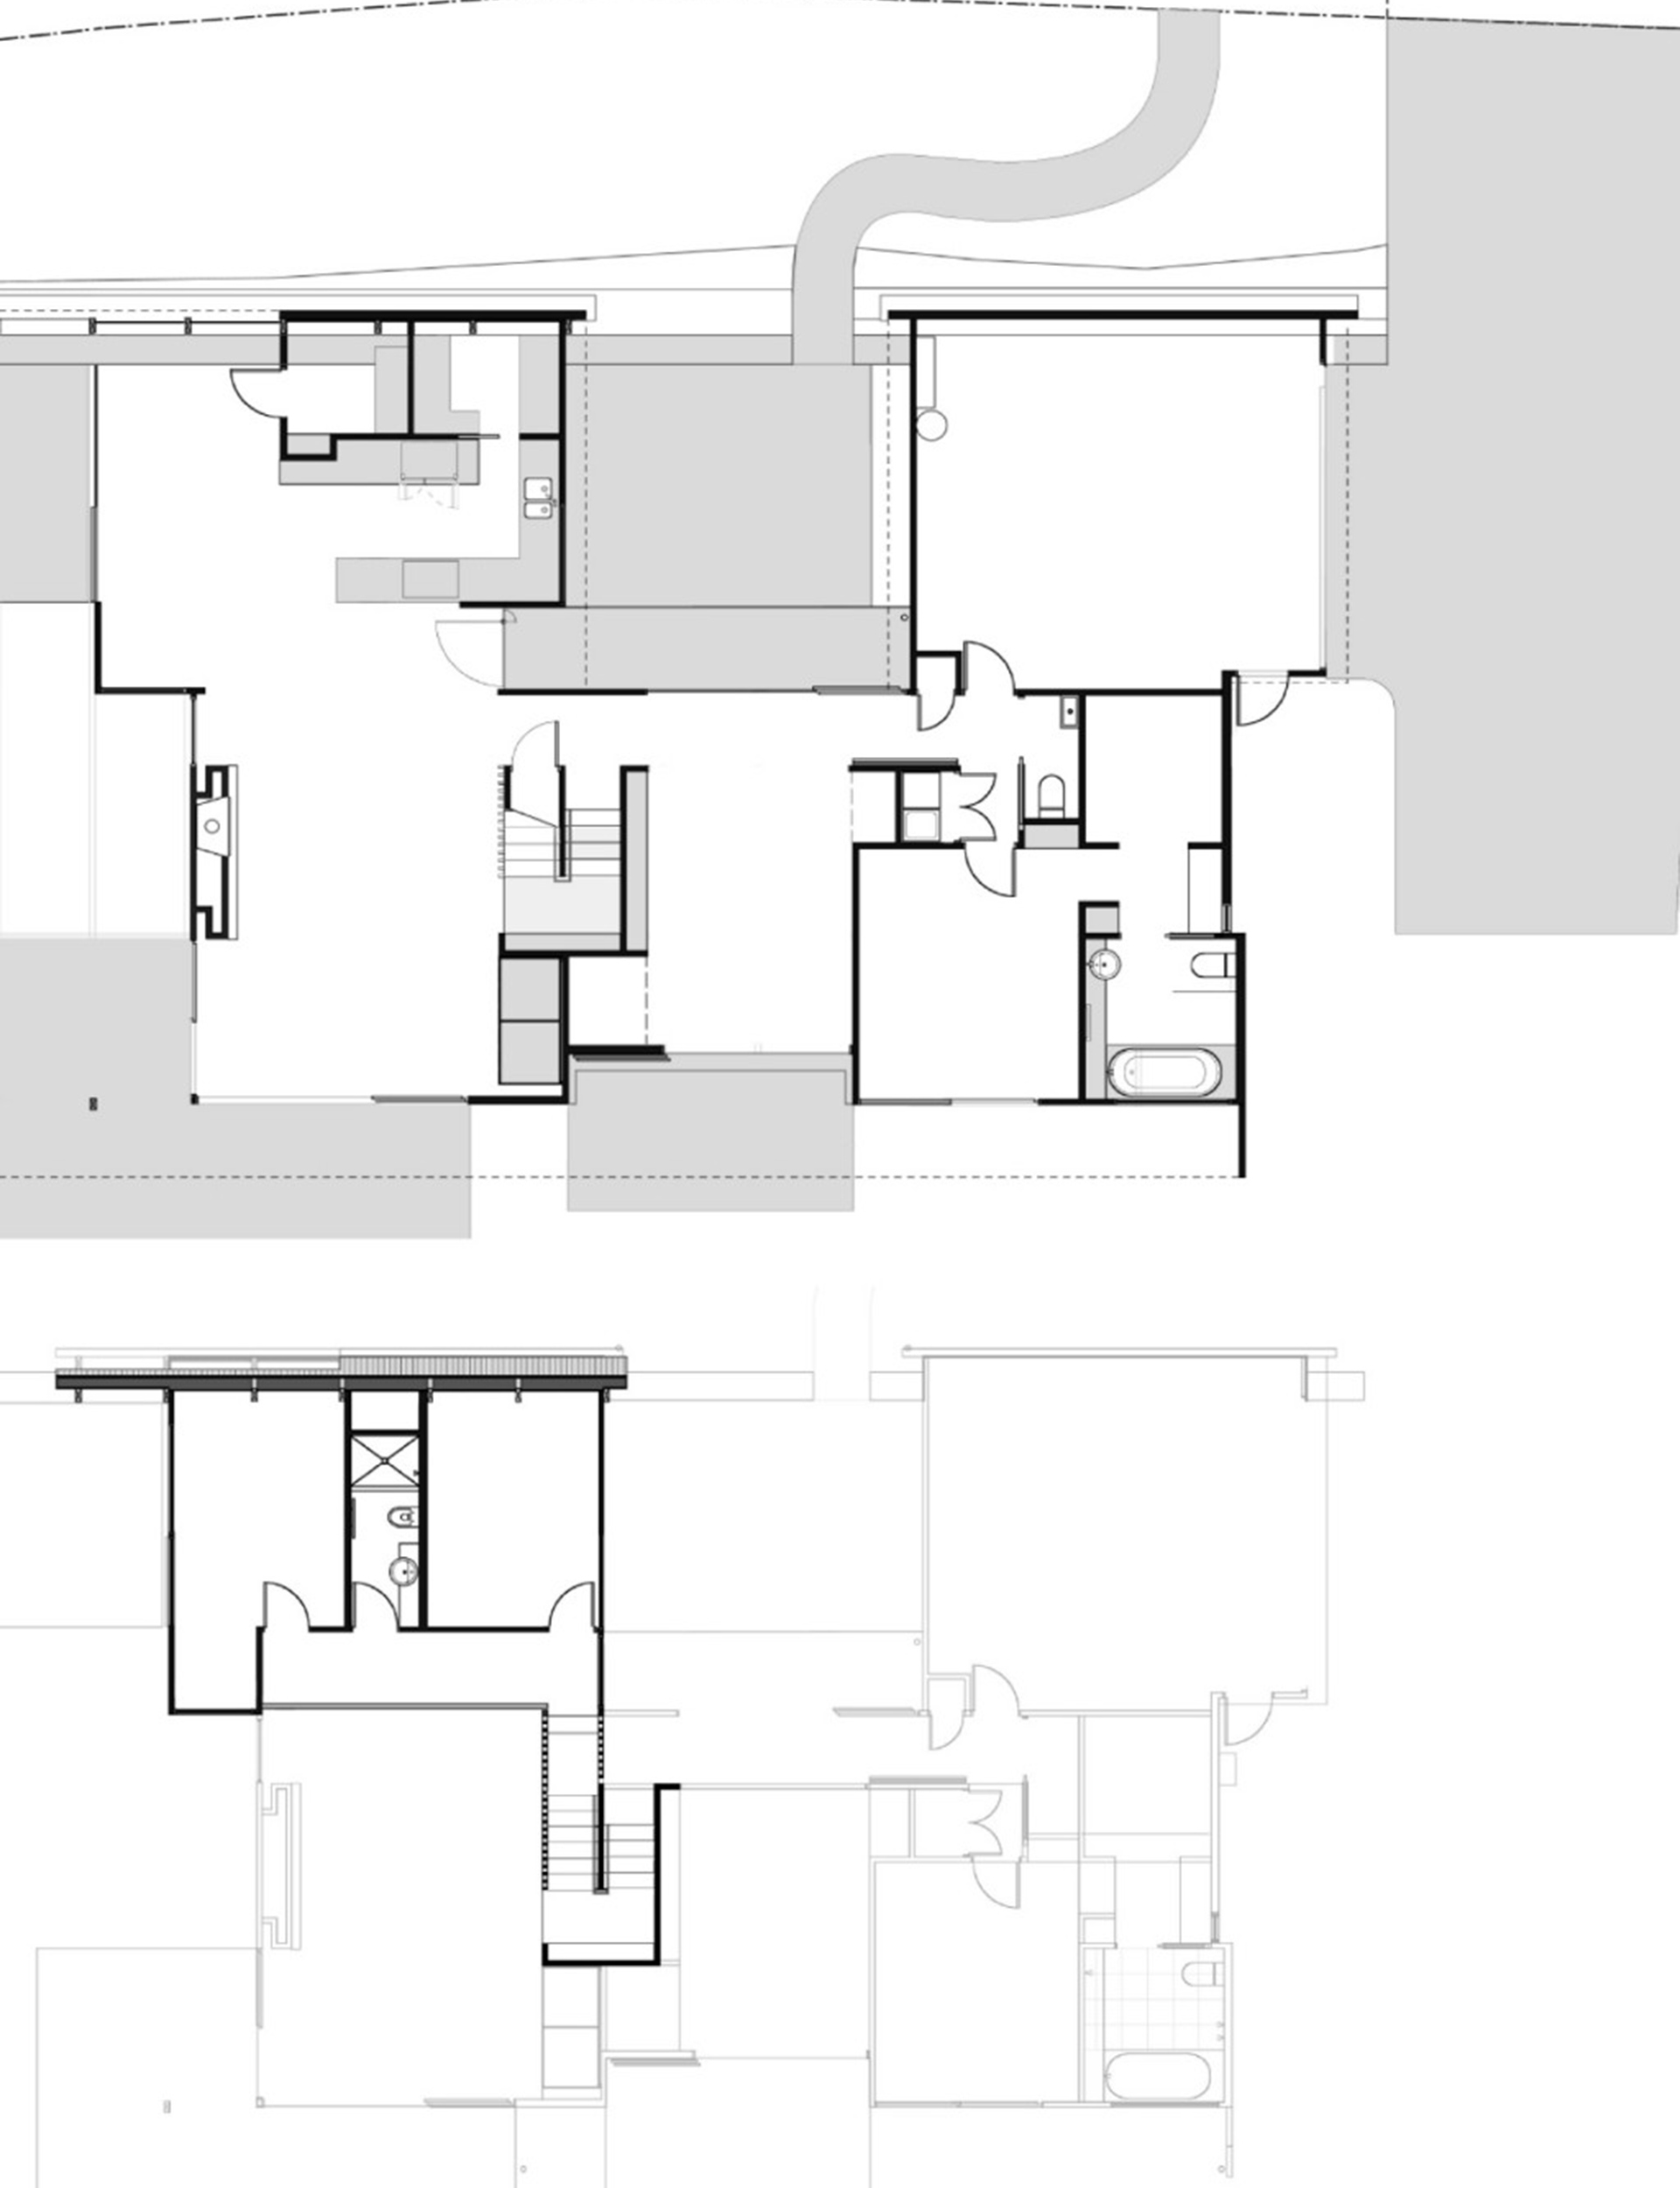 The home's ground floor (top) contains the living spaces and main bedroom, while the upper floor (bottom) contains the spare bedrooms and a bathroom.